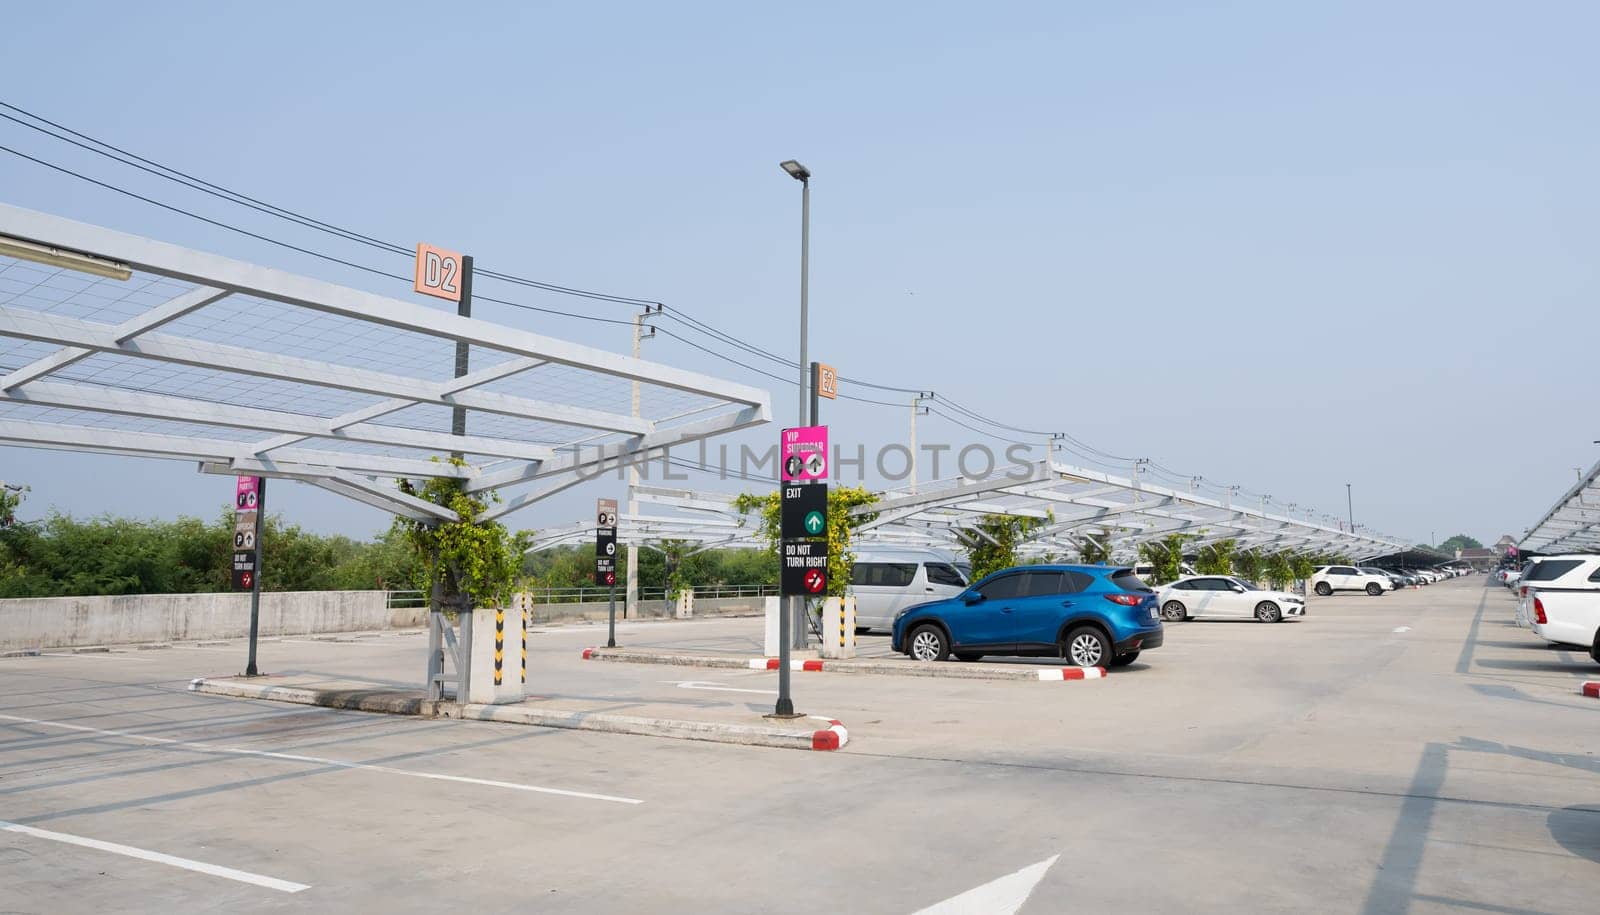 Concrete car parking lot with empty space. Private car park for customer service. Parking zone on a sunny day. Outdoor parking lot of shopping mall. Outdoor car parking lot with green climbing plant. 